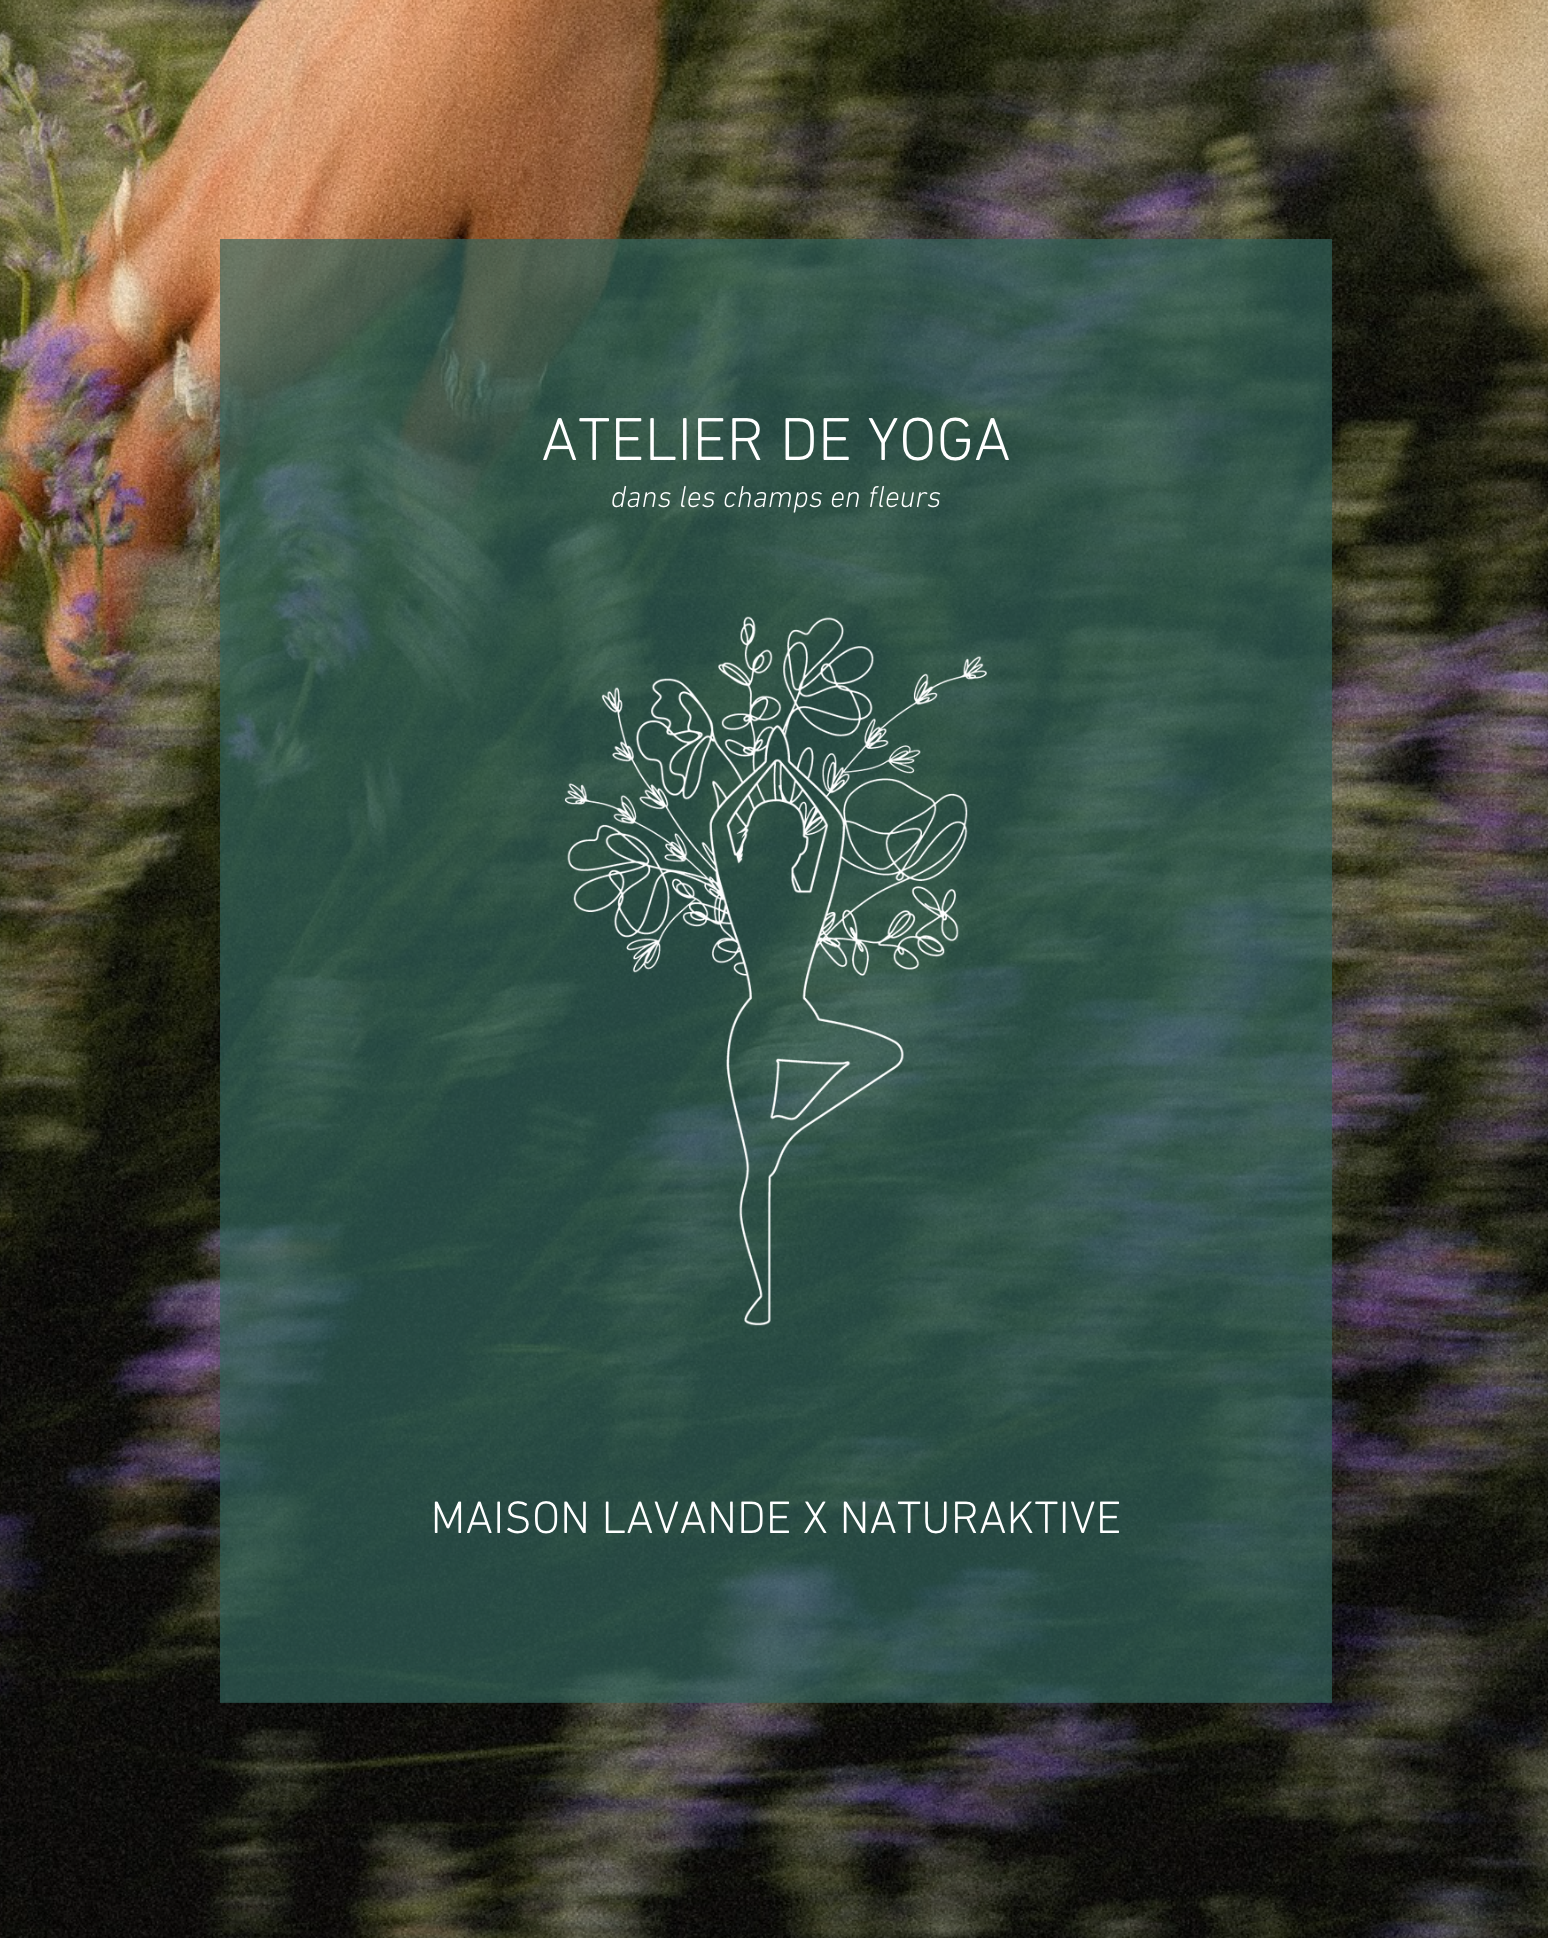 Forfait yoga dans les champs || Yoga class in the field